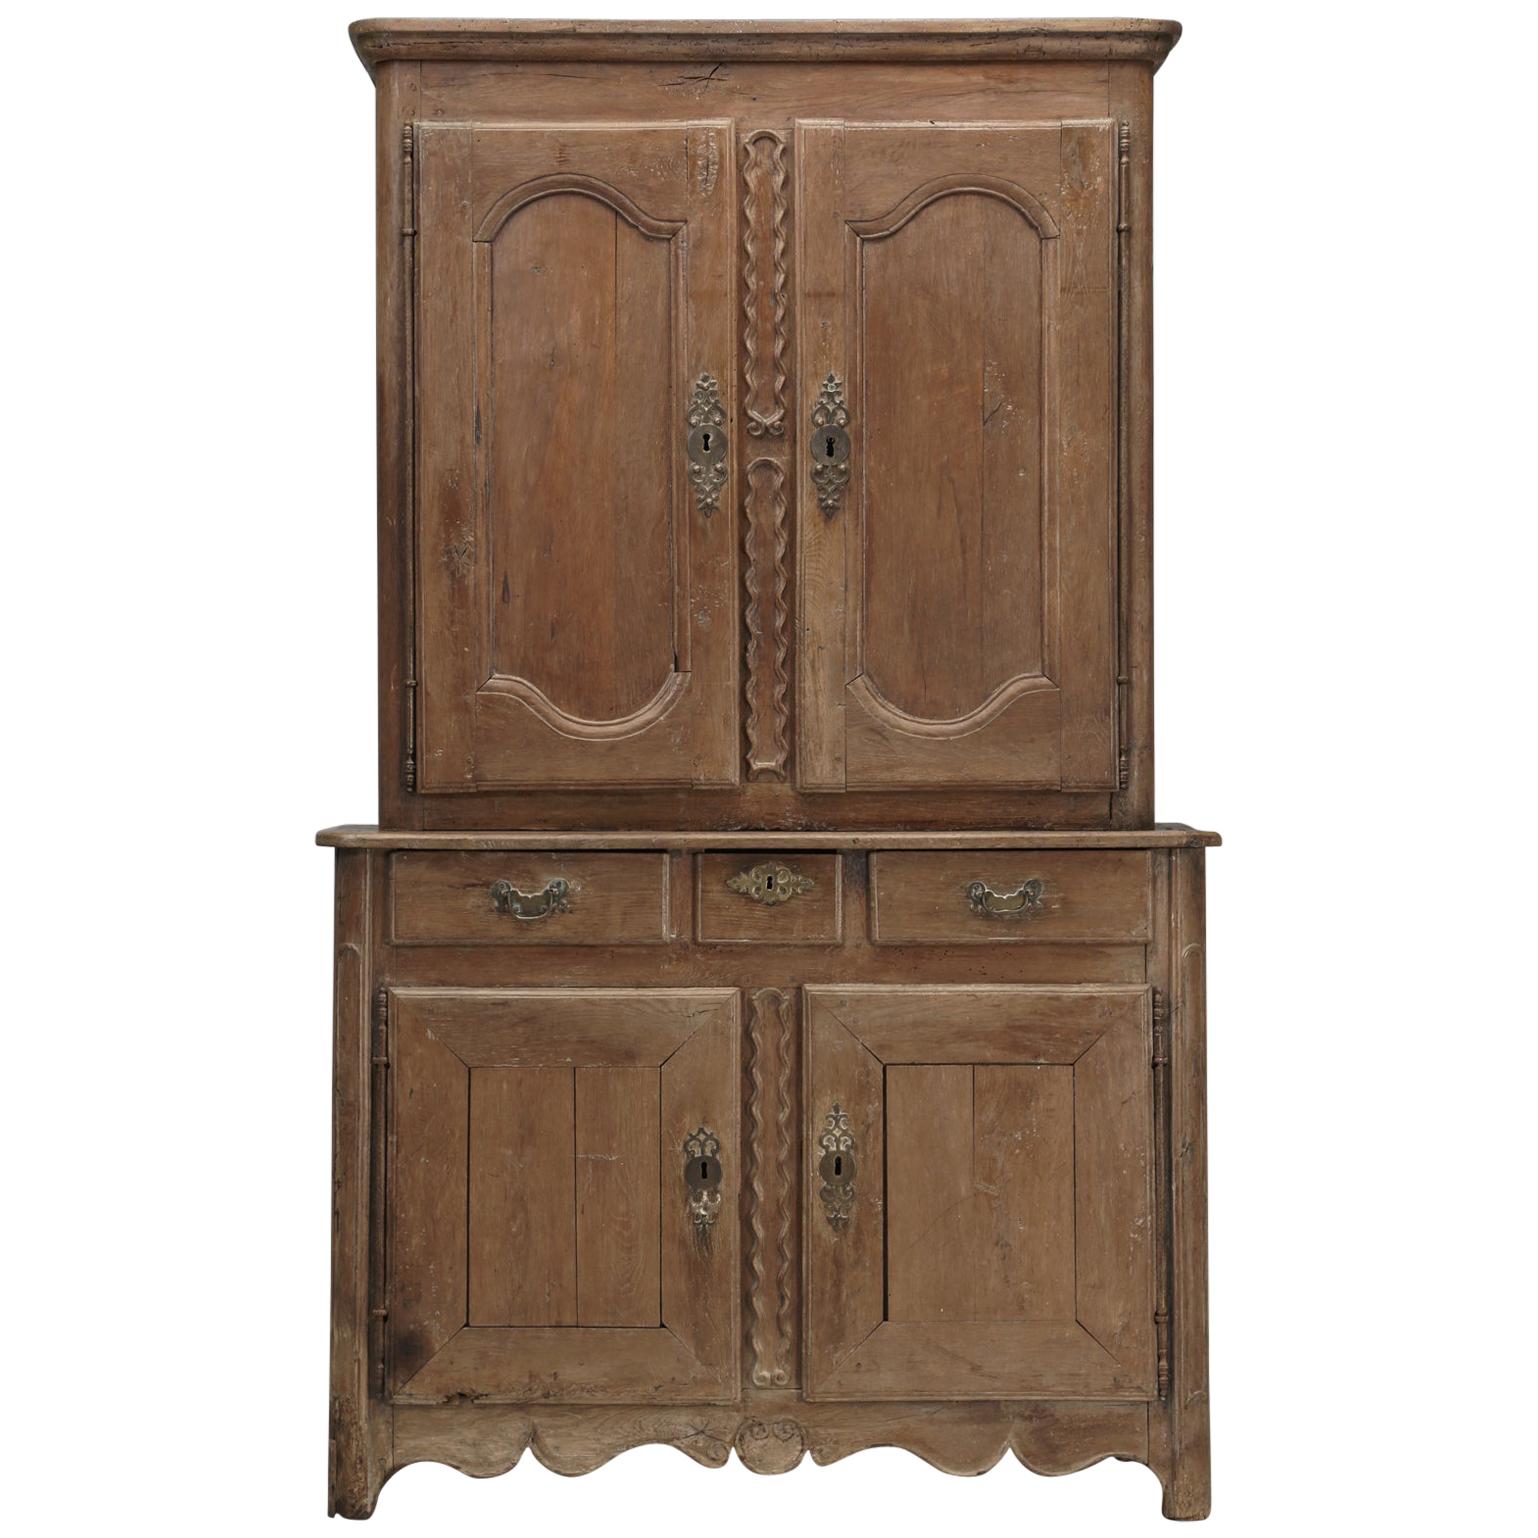 Antique French Deux Corp 'Cupboard' in Original Finish from Chateau Unrestored